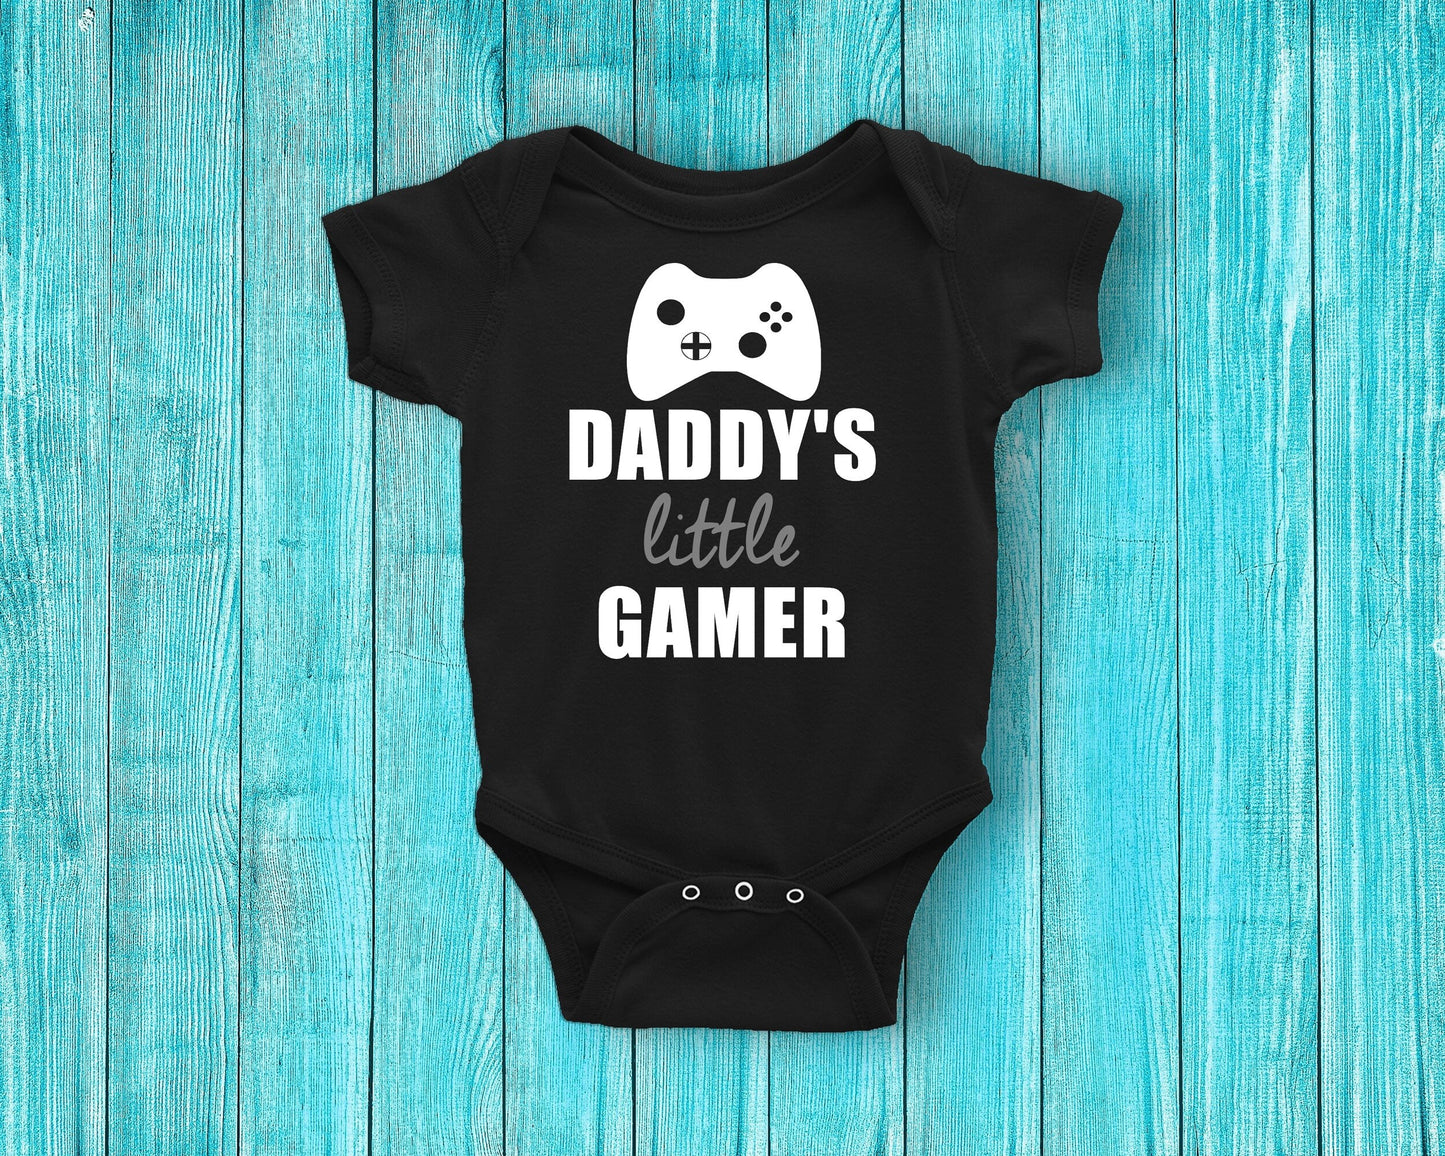 Daddy's Little Gamer Infant or Kids Shirt or Bodysuit - funny baby gift - baby shower gifts - new baby gift - baby announcement - gamer dad